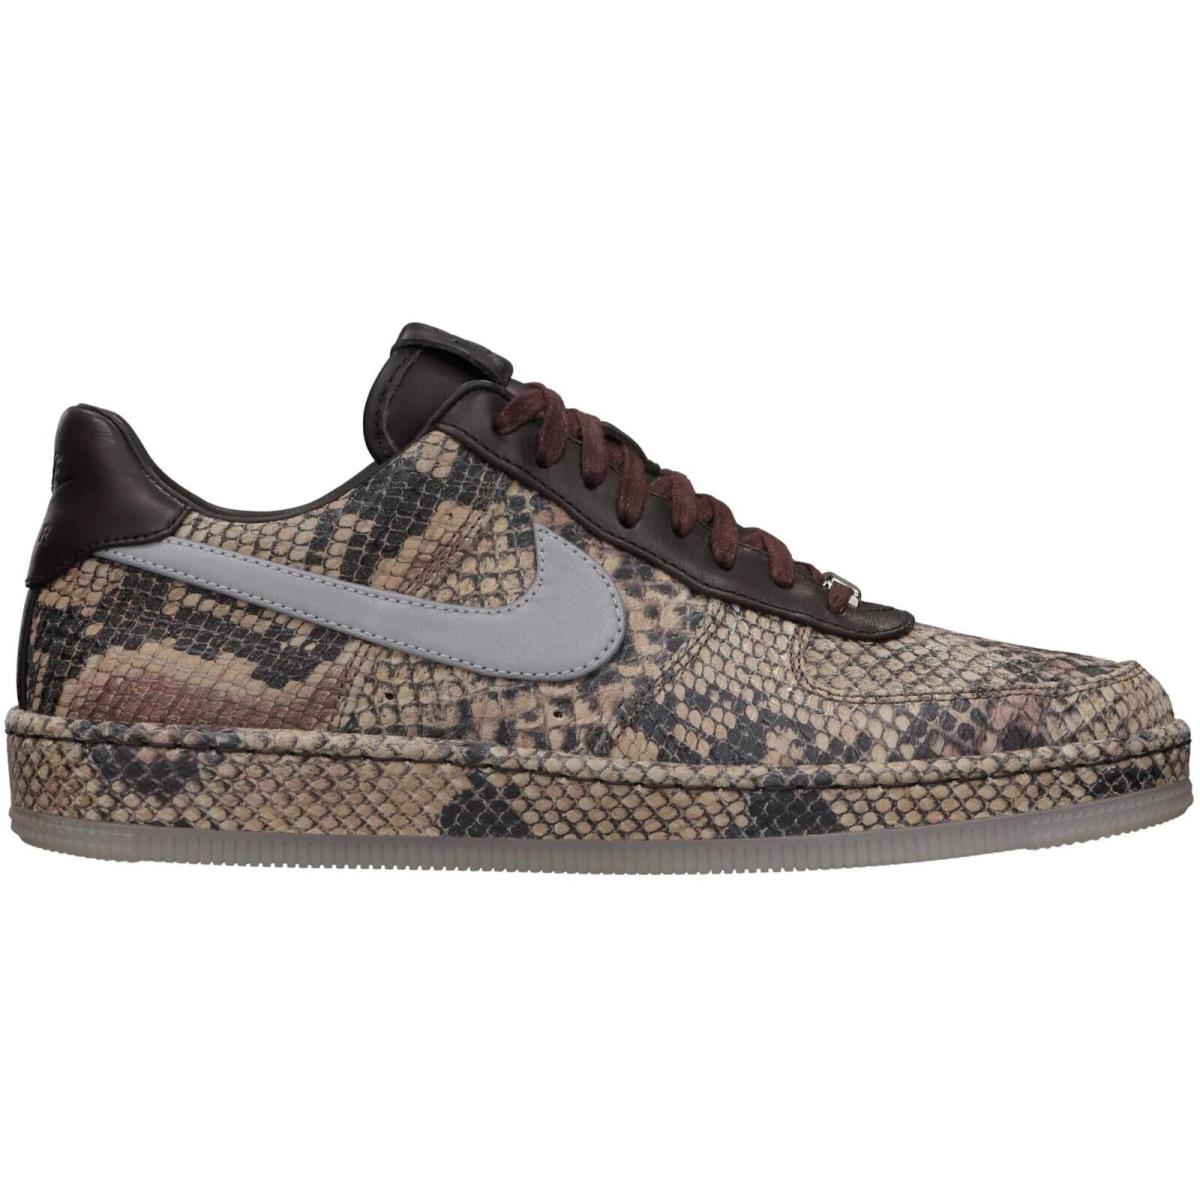 Nike Air Force 1 Low Downtown Python Shoes Size 11.5 577657-200